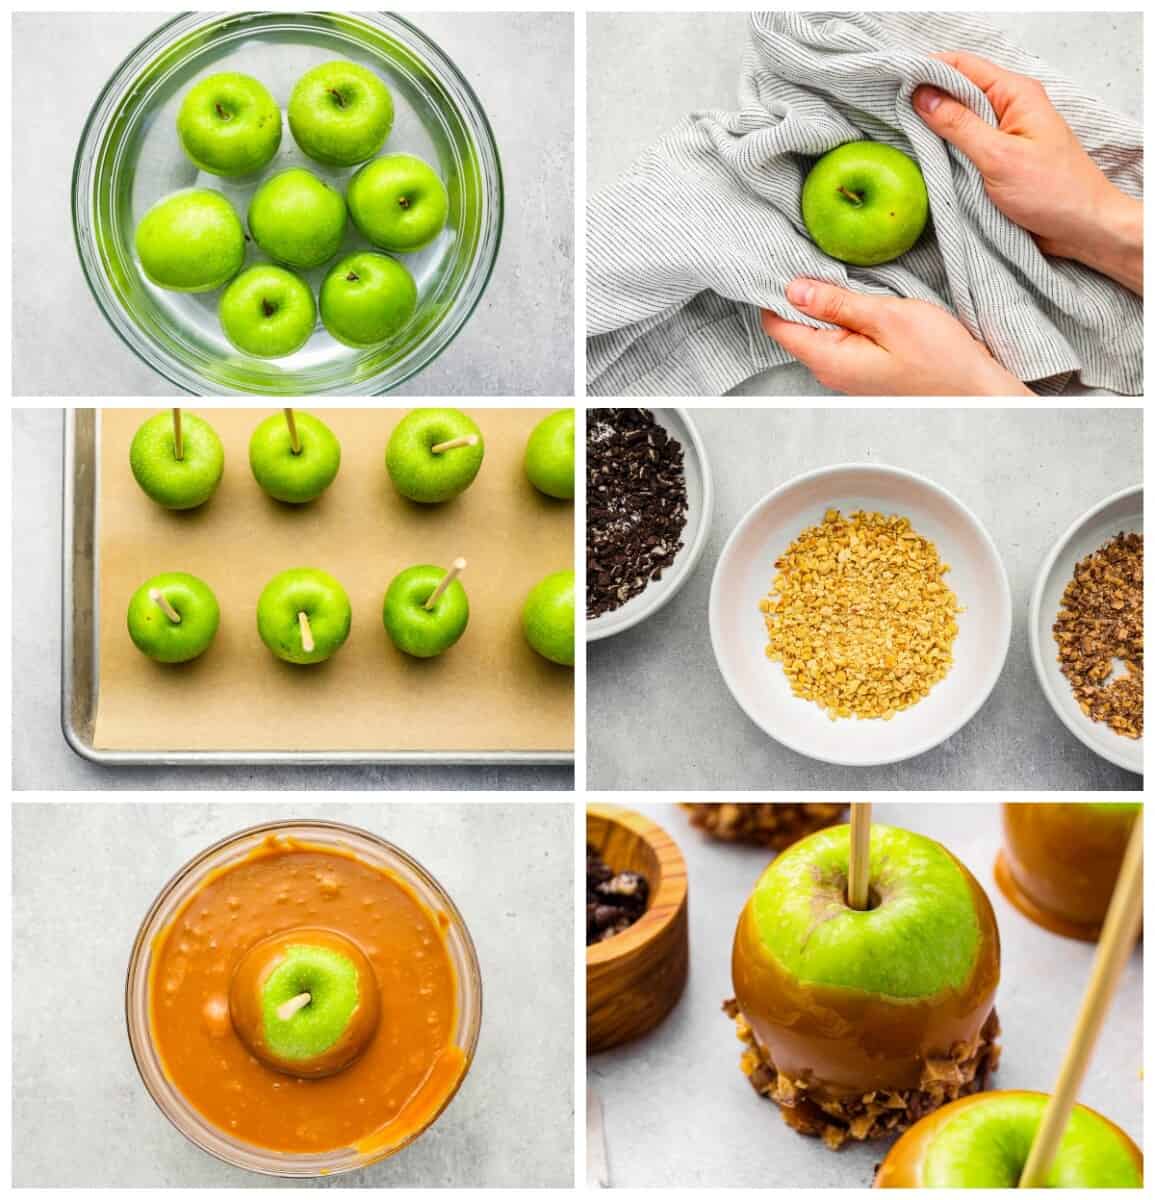 how to make caramel apples step by step photo instructions